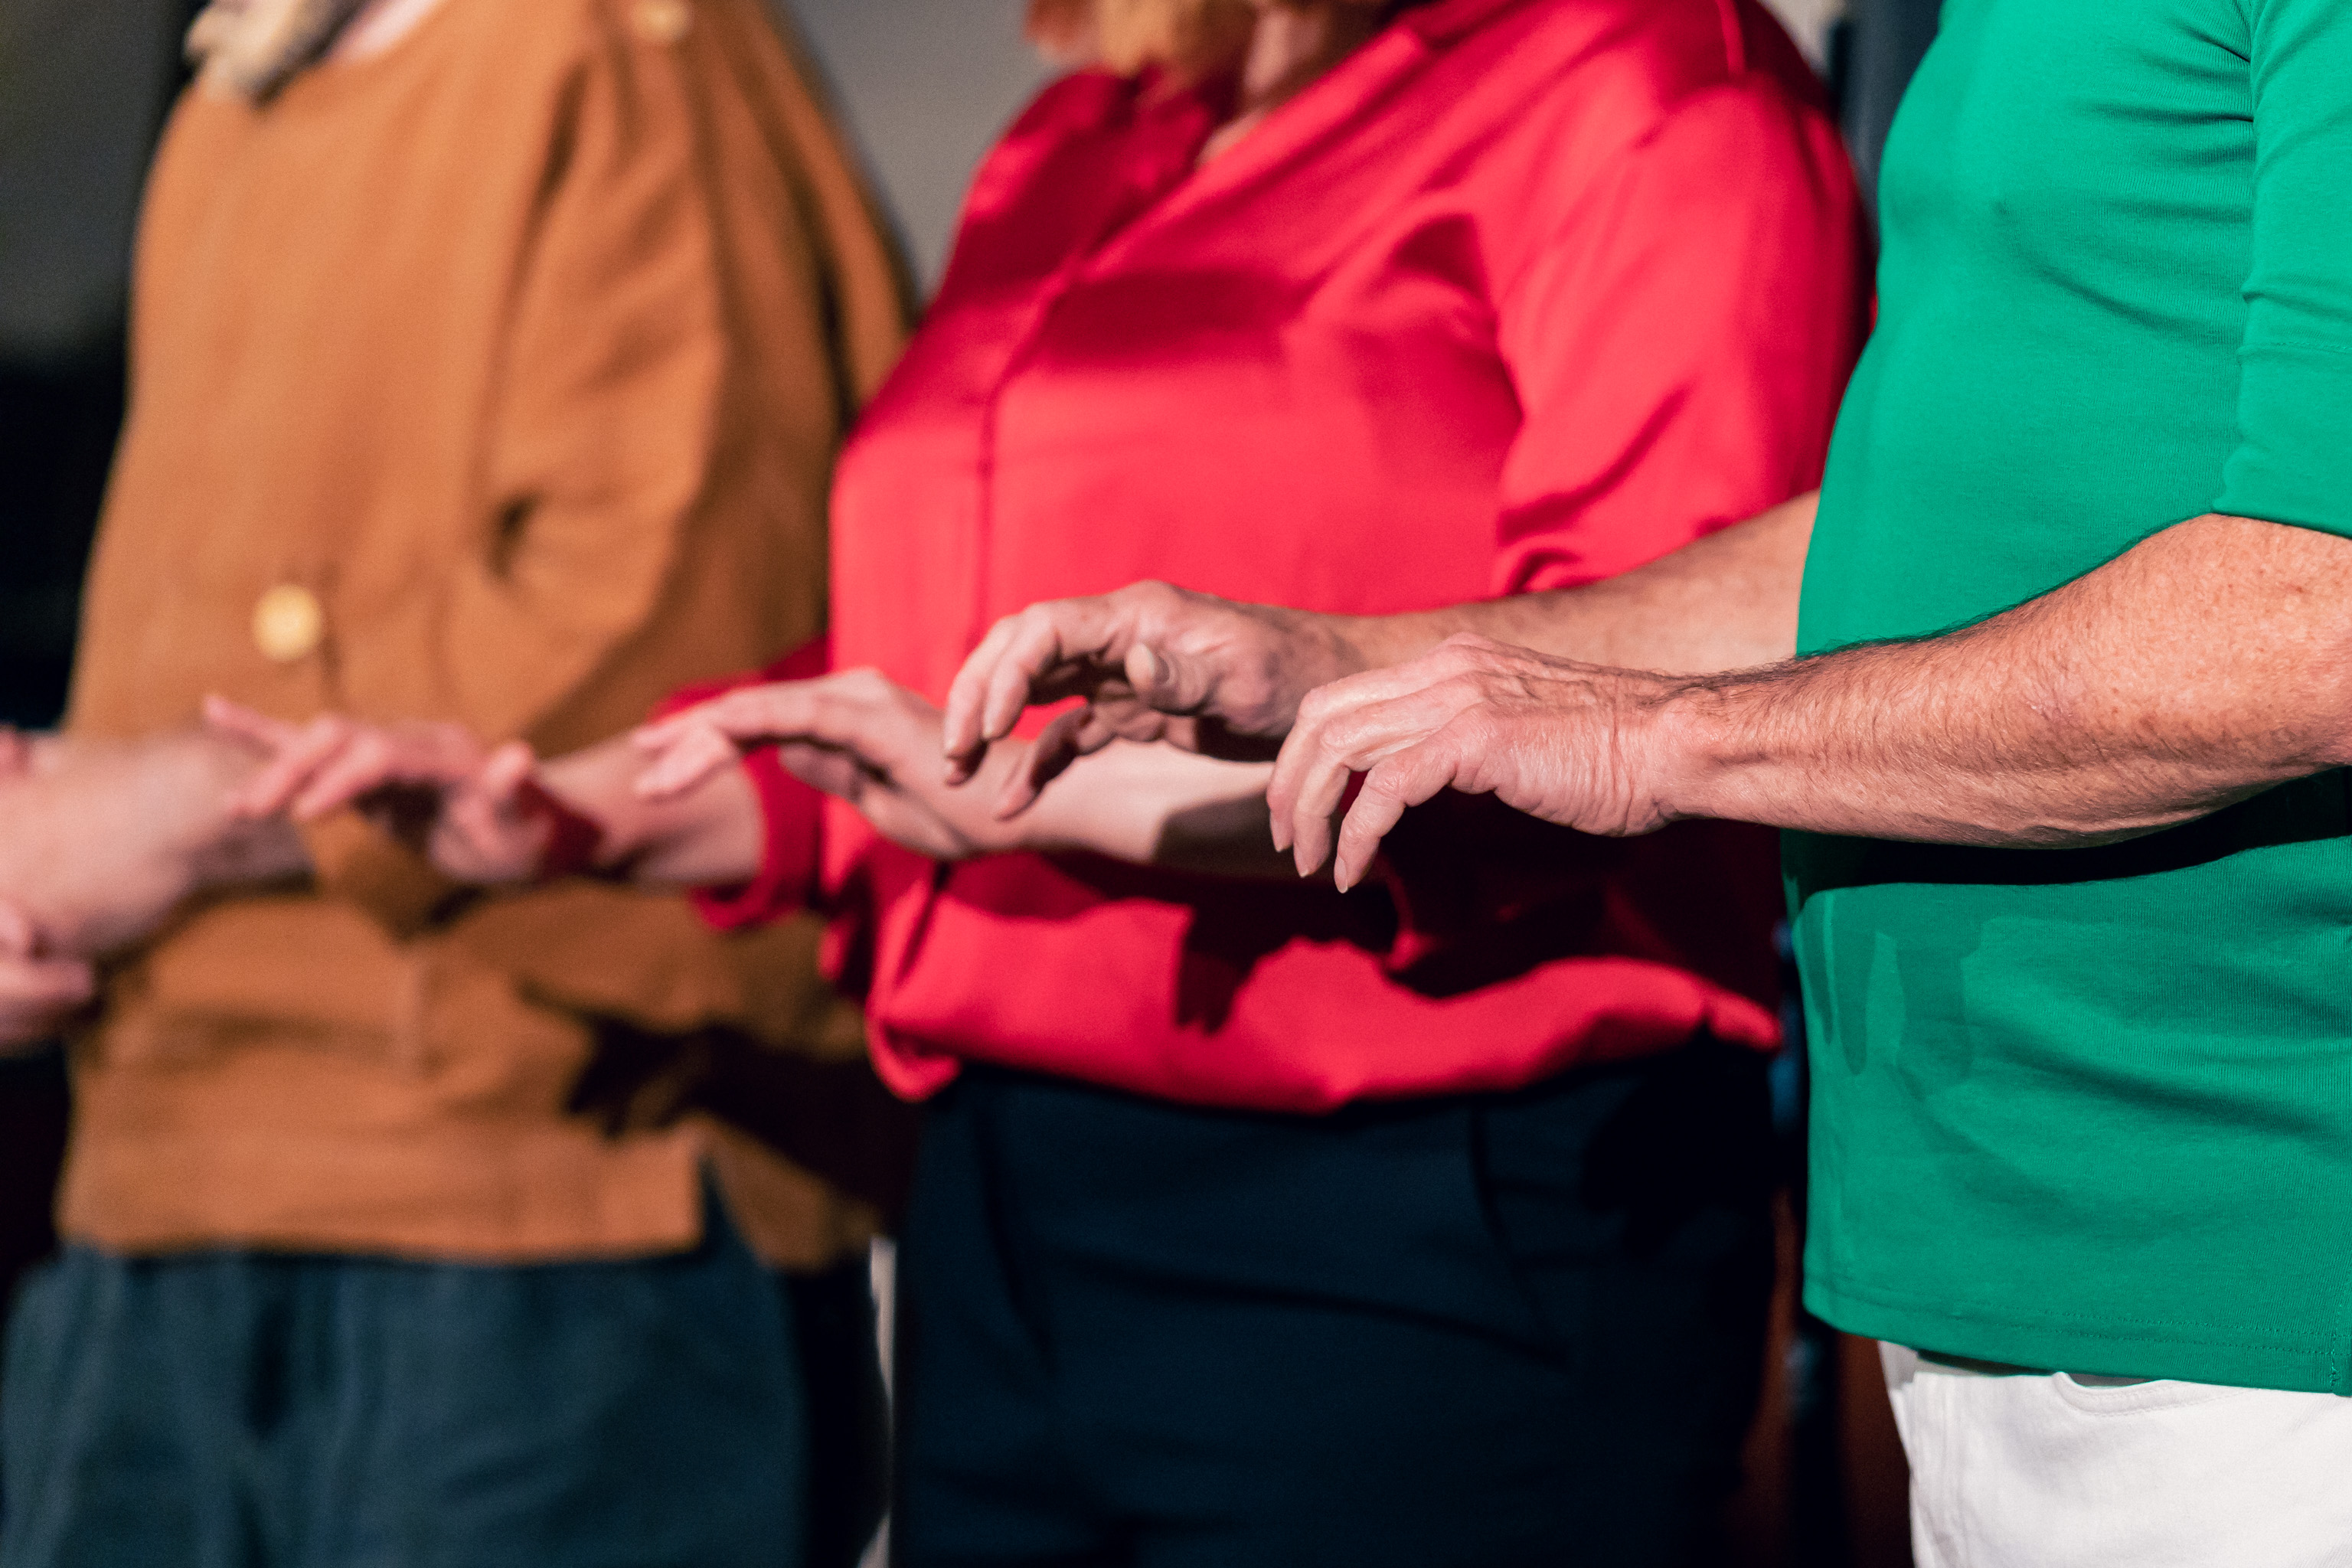 Three torsos with their hands outstretched, fingers curled and pointed downwards, as if they are all typing on keyboards. The person on the left is wearing an orange short, the person in the middle a red shirt, and the person on the right a green shirt. 